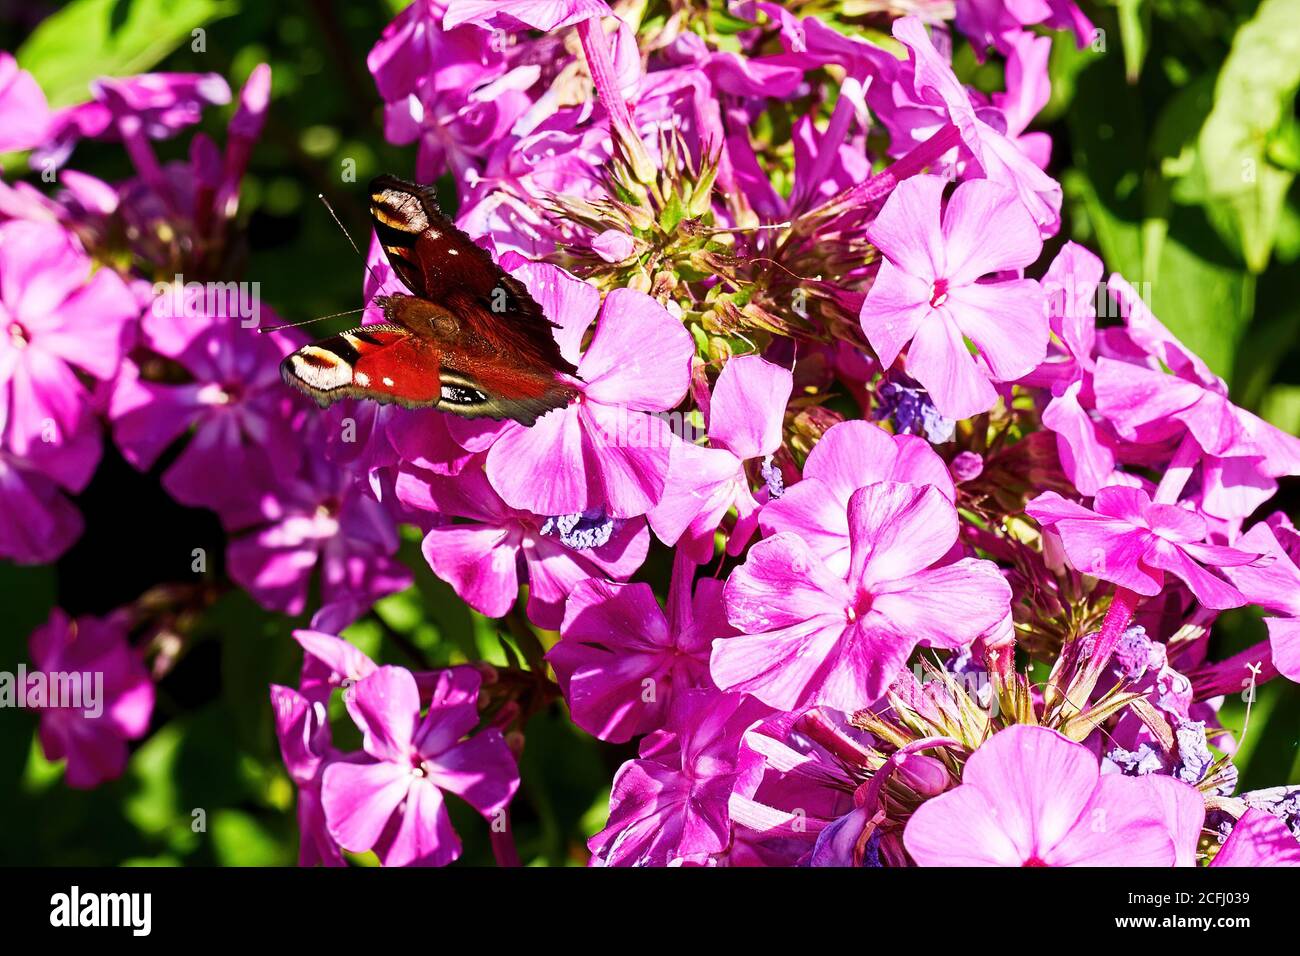 Vivid spotted orange butterfly on the bright purple phlox flower. Animals and floral backgrounds Stock Photo